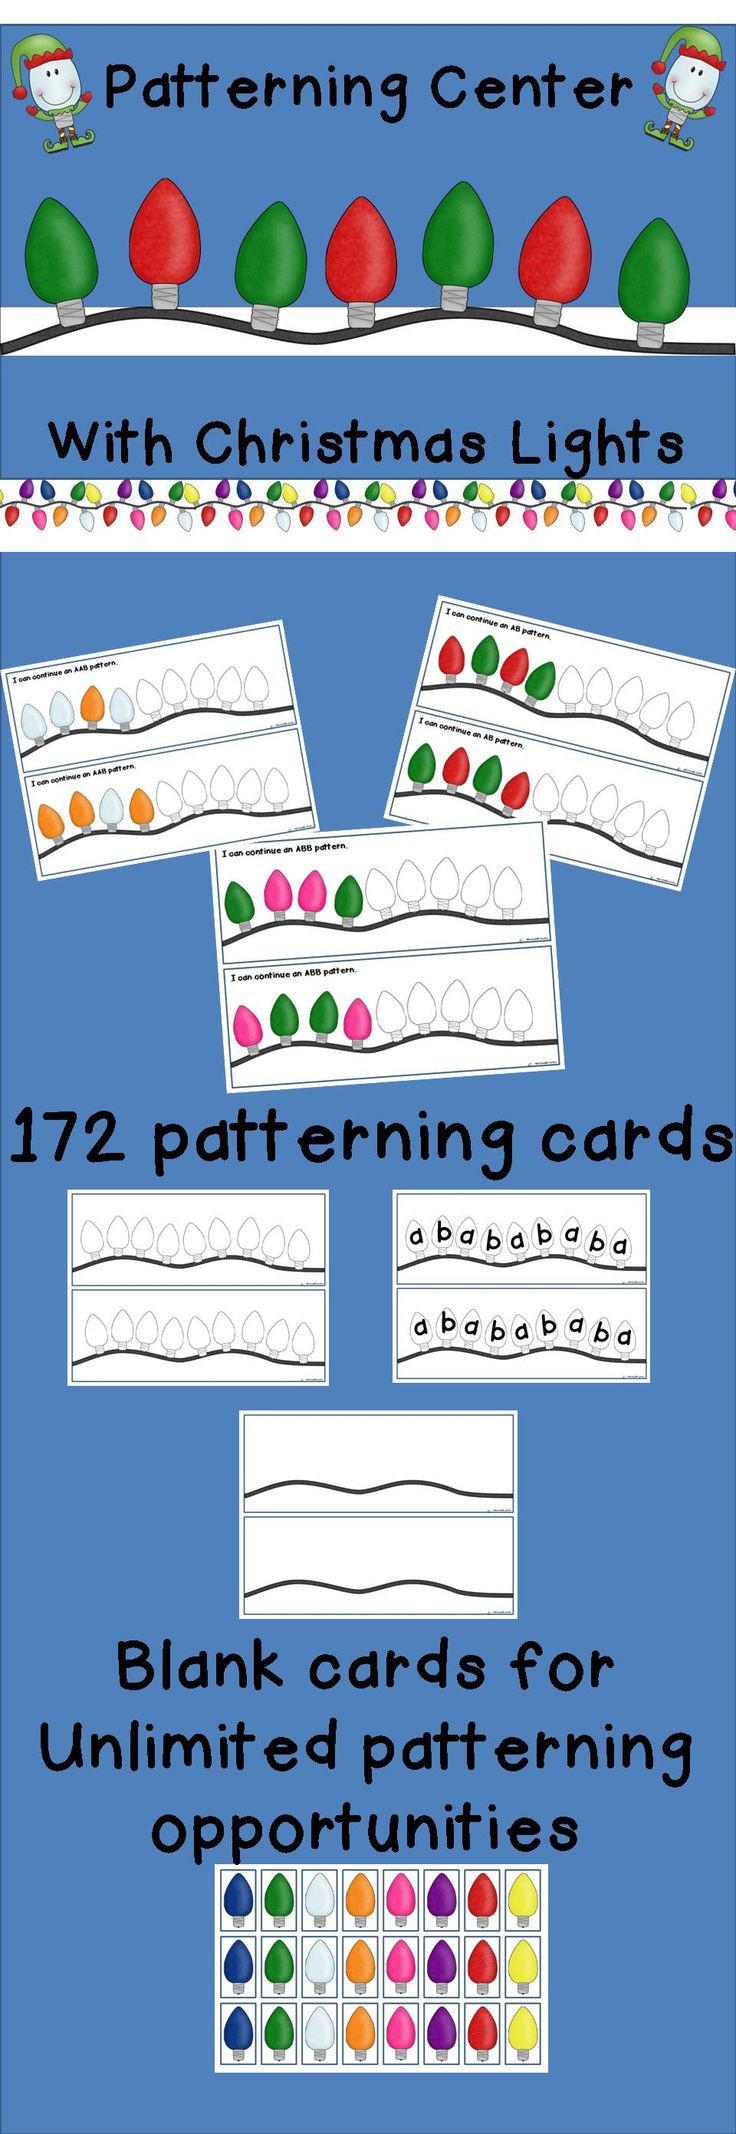 independent patterning fun for your students.